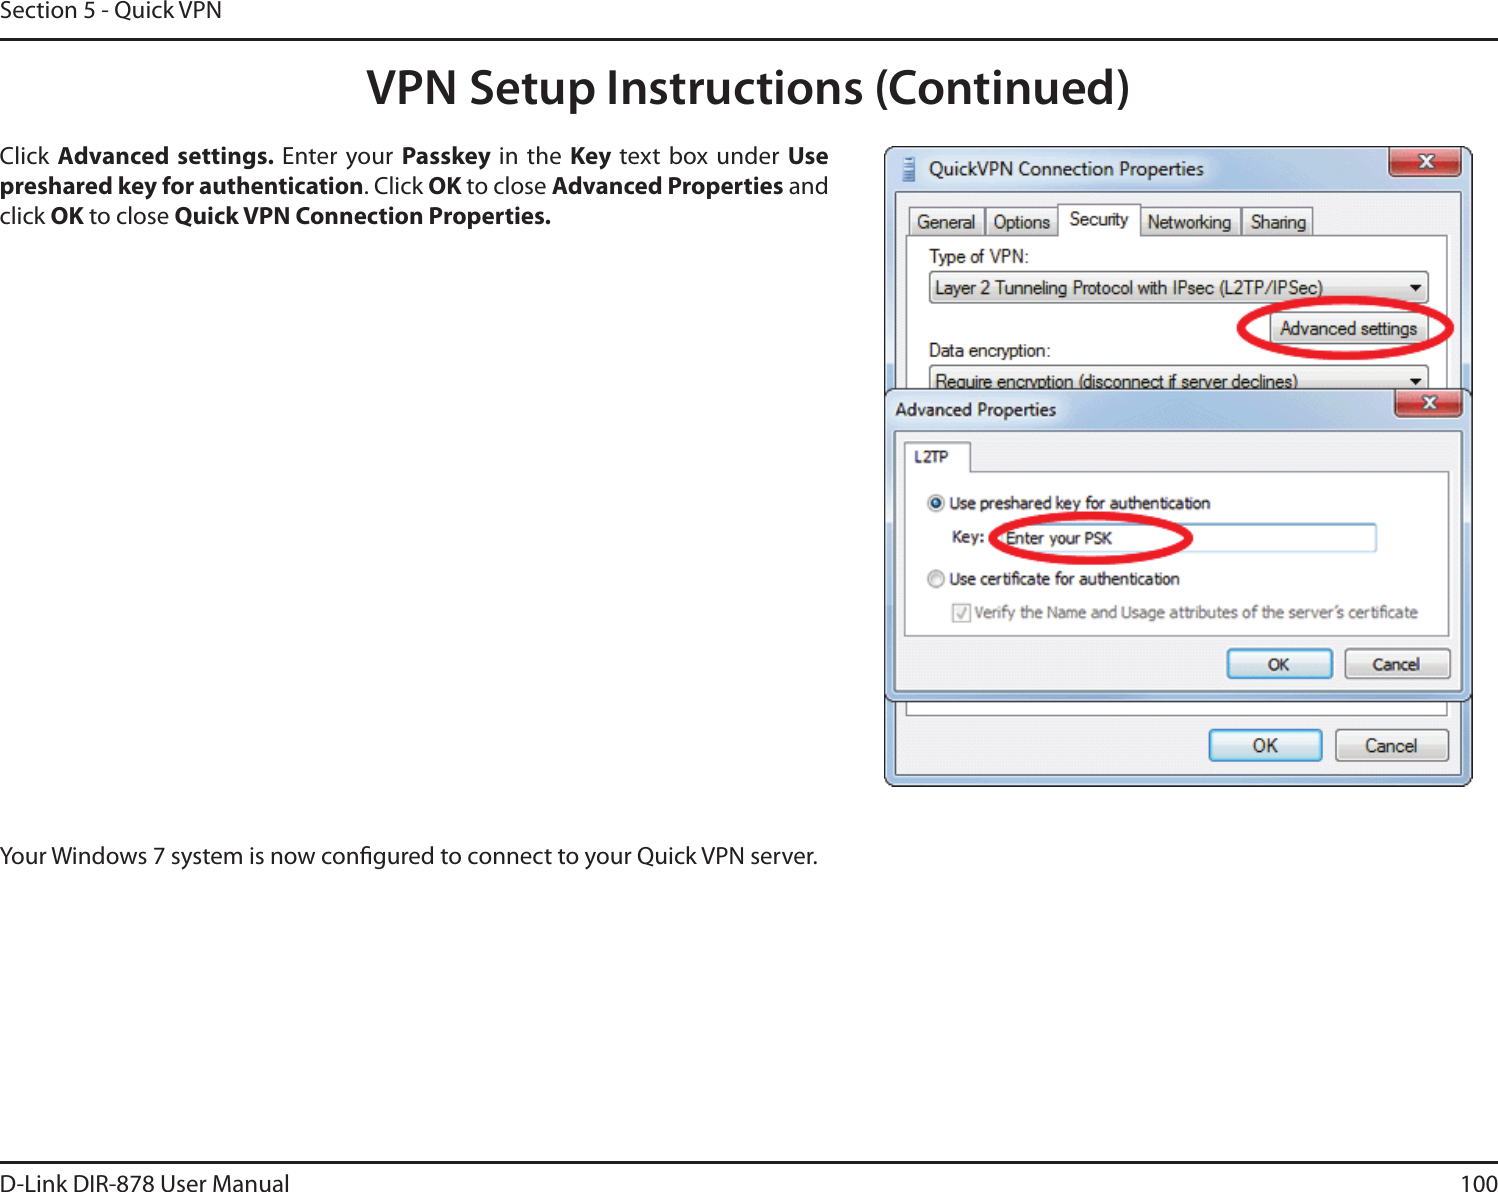 100D-Link DIR-878 User ManualSection 5 - Quick VPNYour Windows 7 system is now congured to connect to your Quick VPN server.Click &quot;EWBODFETFUUJOHTEnter your  Passkey in the Key text box under Use preshared key for authentication. Click OK to close &quot;EWBODFE1SPQFSUJFT and click OK to close Quick VPN Connection Properties.VPN Setup Instructions (Continued)